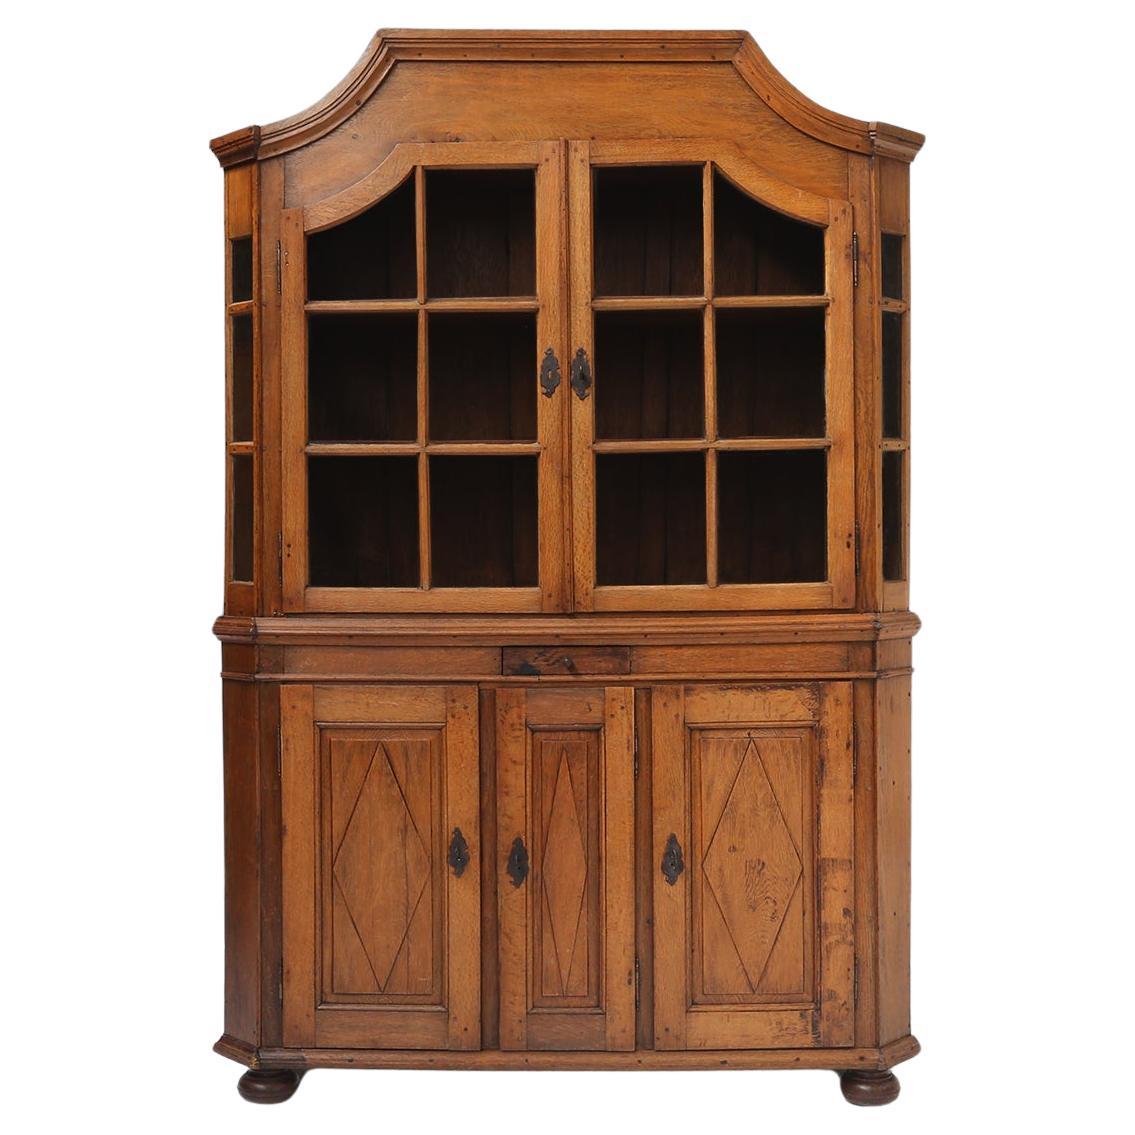 Early 18th century German vitrine cabinet For Sale